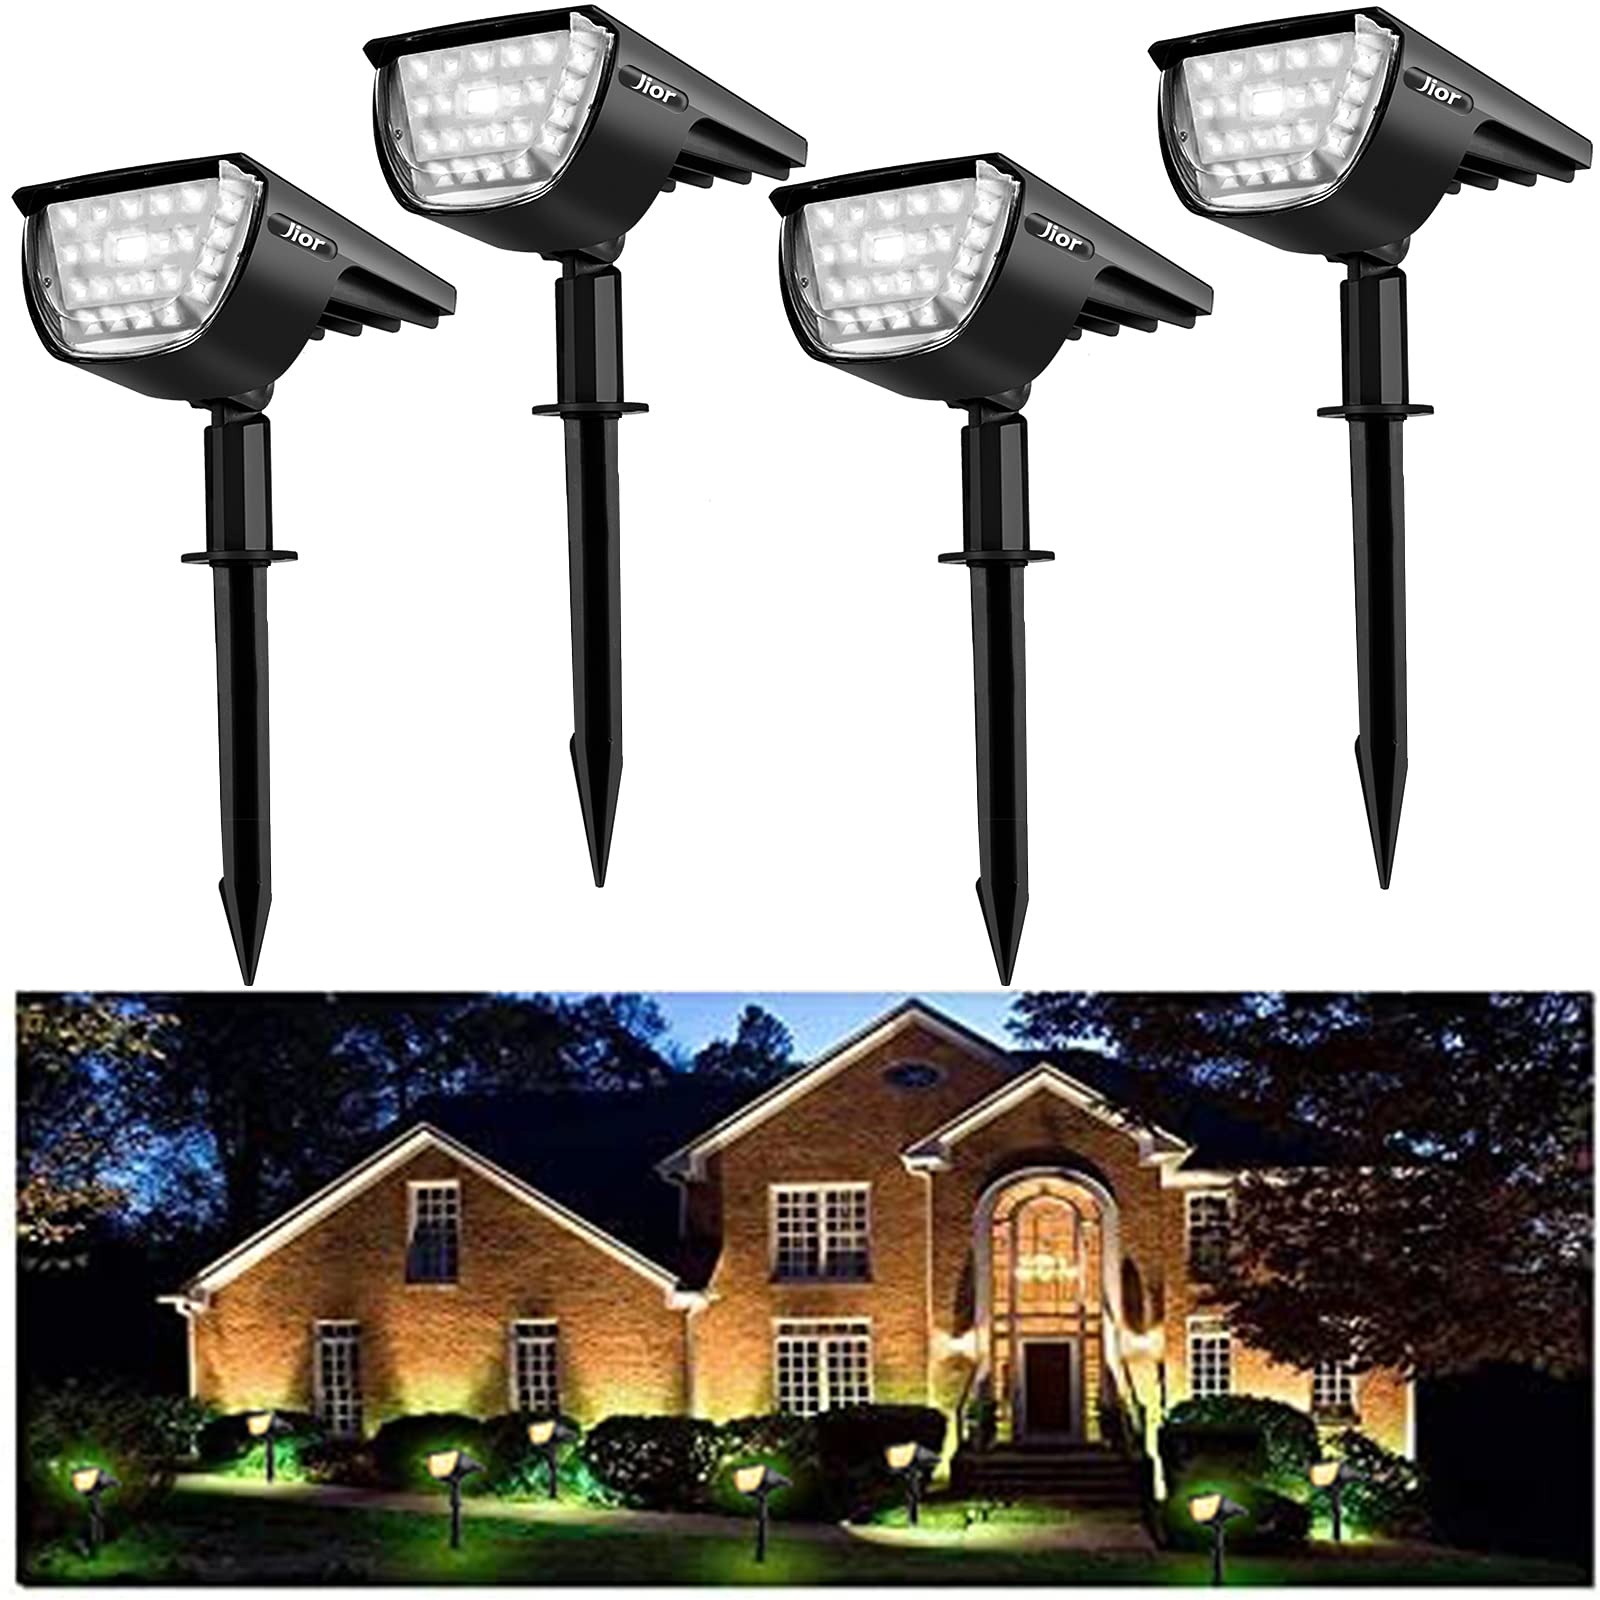 Jior Solar Landscape SpotLights Outdoor 32 LED IP65 Waterproof Solar Powered Wall Lights 2-in-1 Adjustable Lights for Garden Yard Driveway Walkway Pool Patio 4 Pack (Cold White)